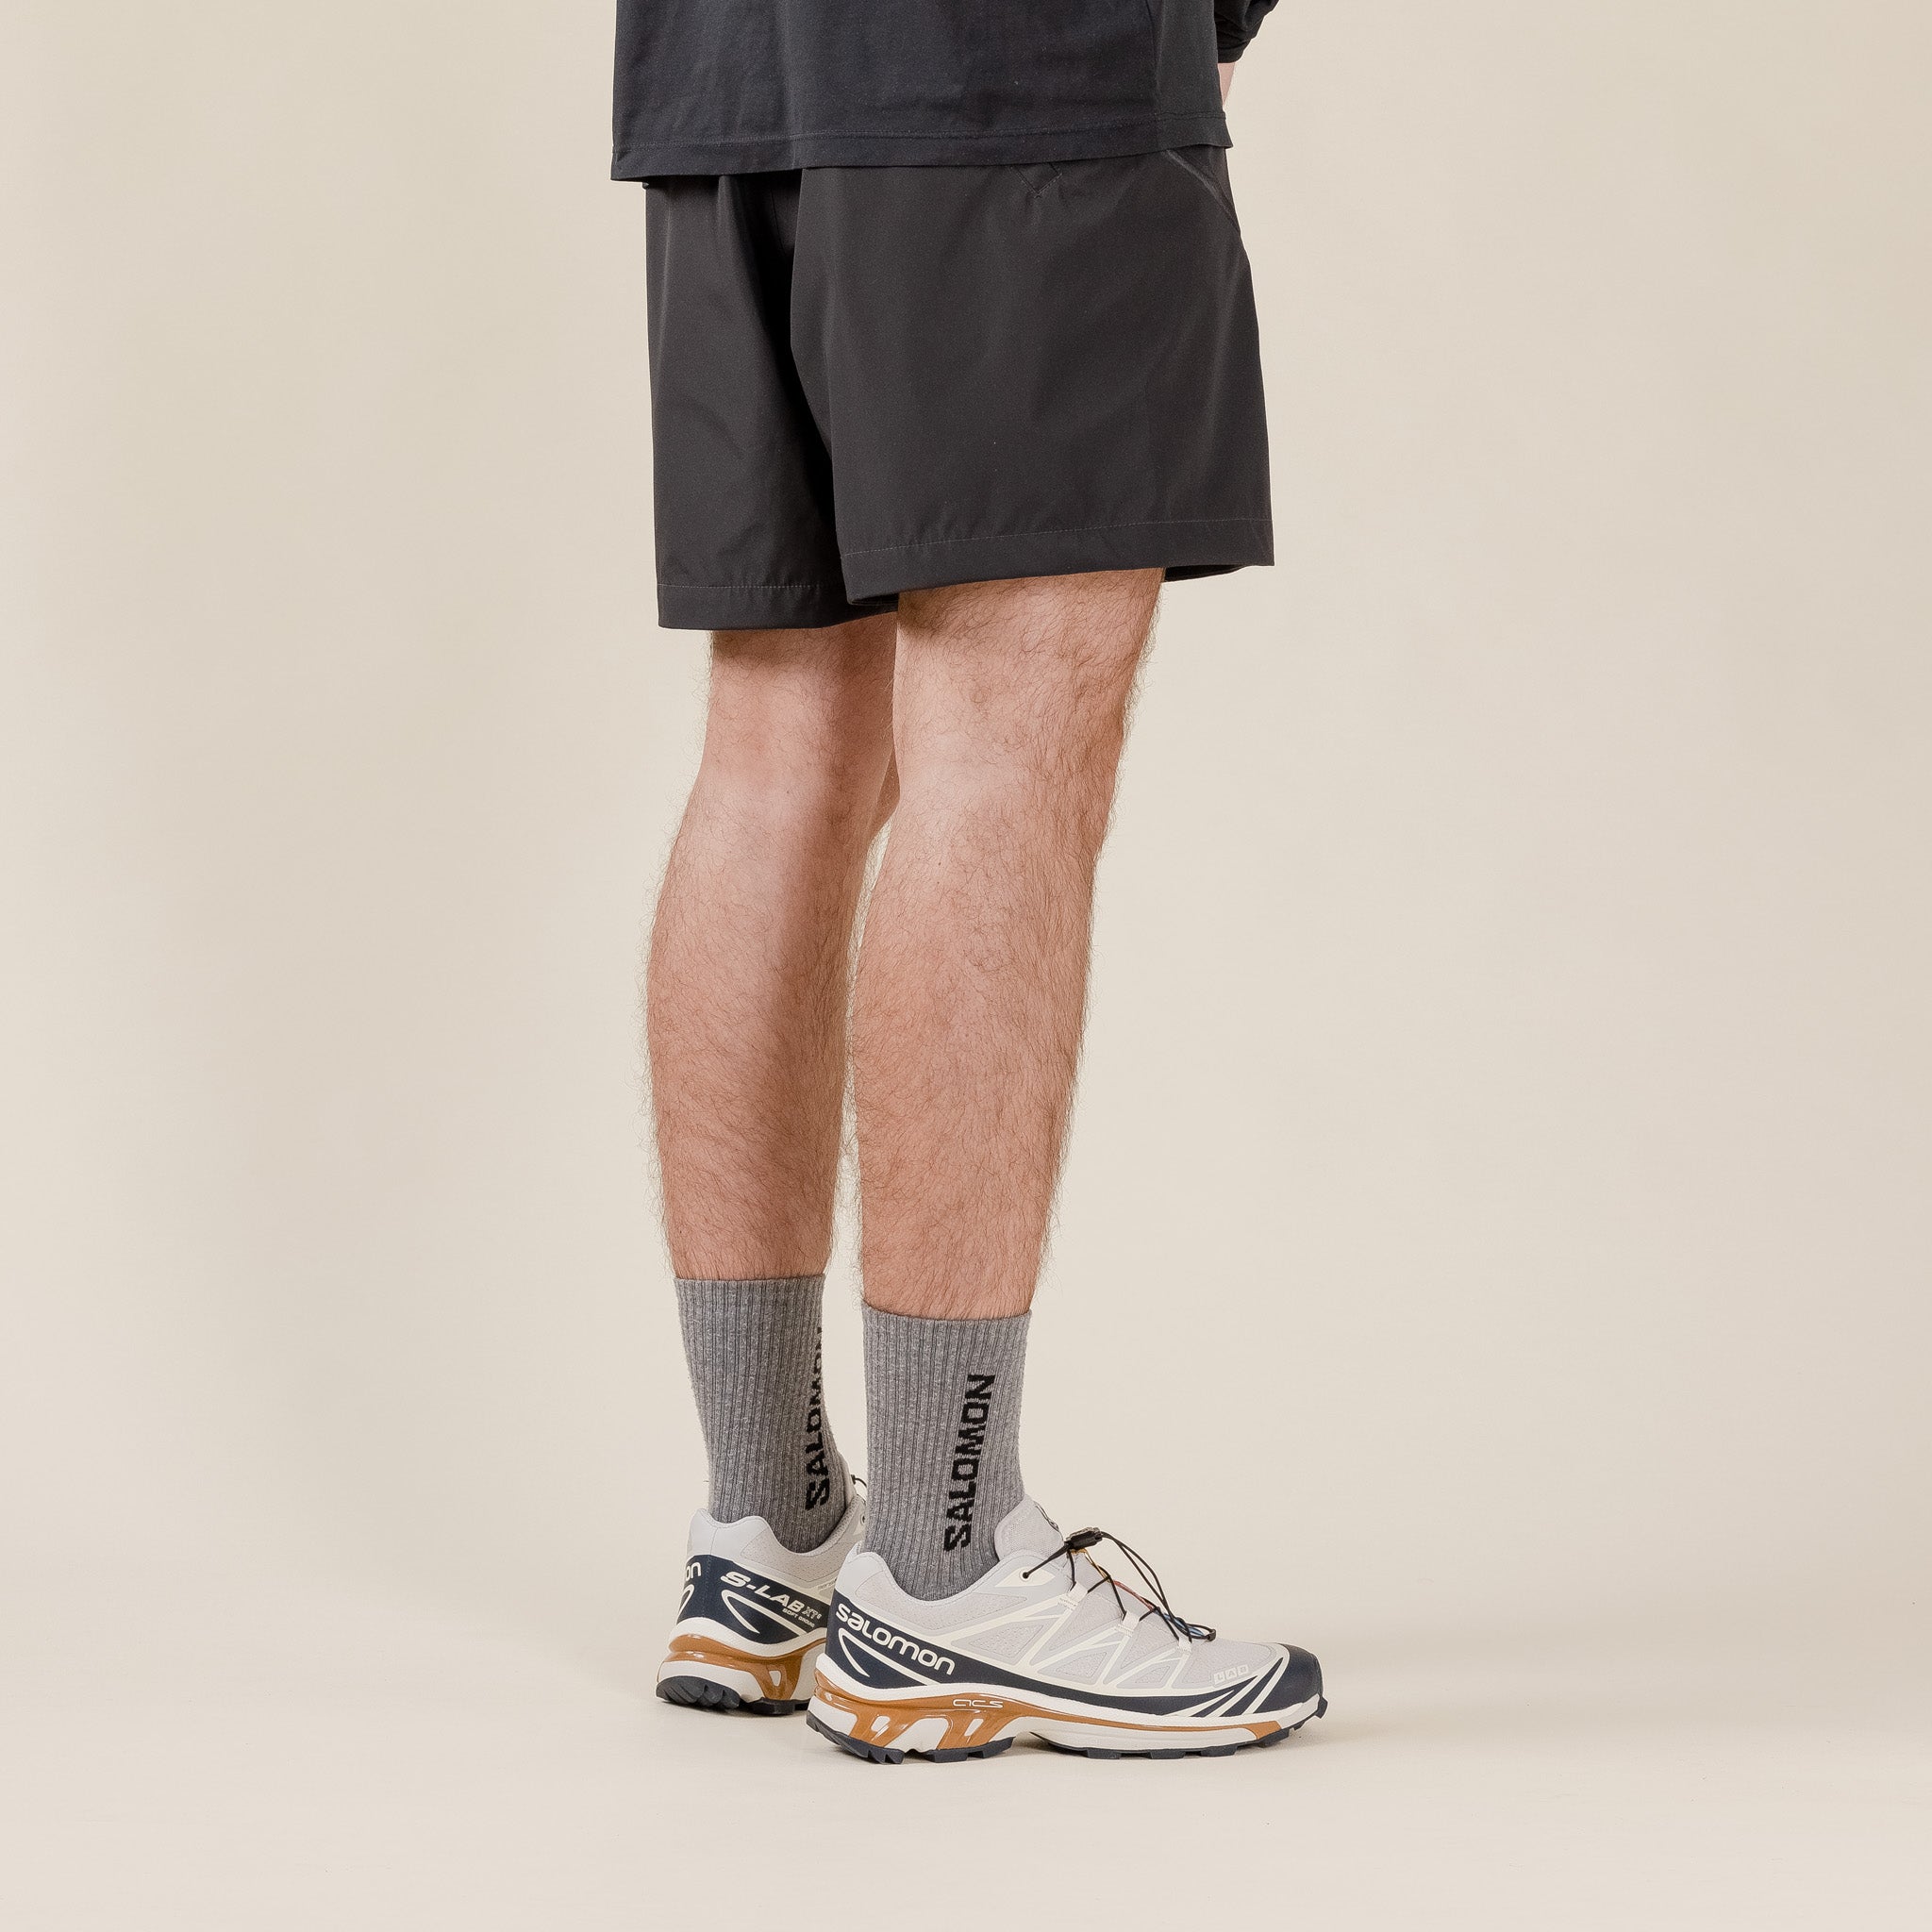 Welter Experiment - WSP003 Seam Sealed 3Layer Shorts - Charcoal